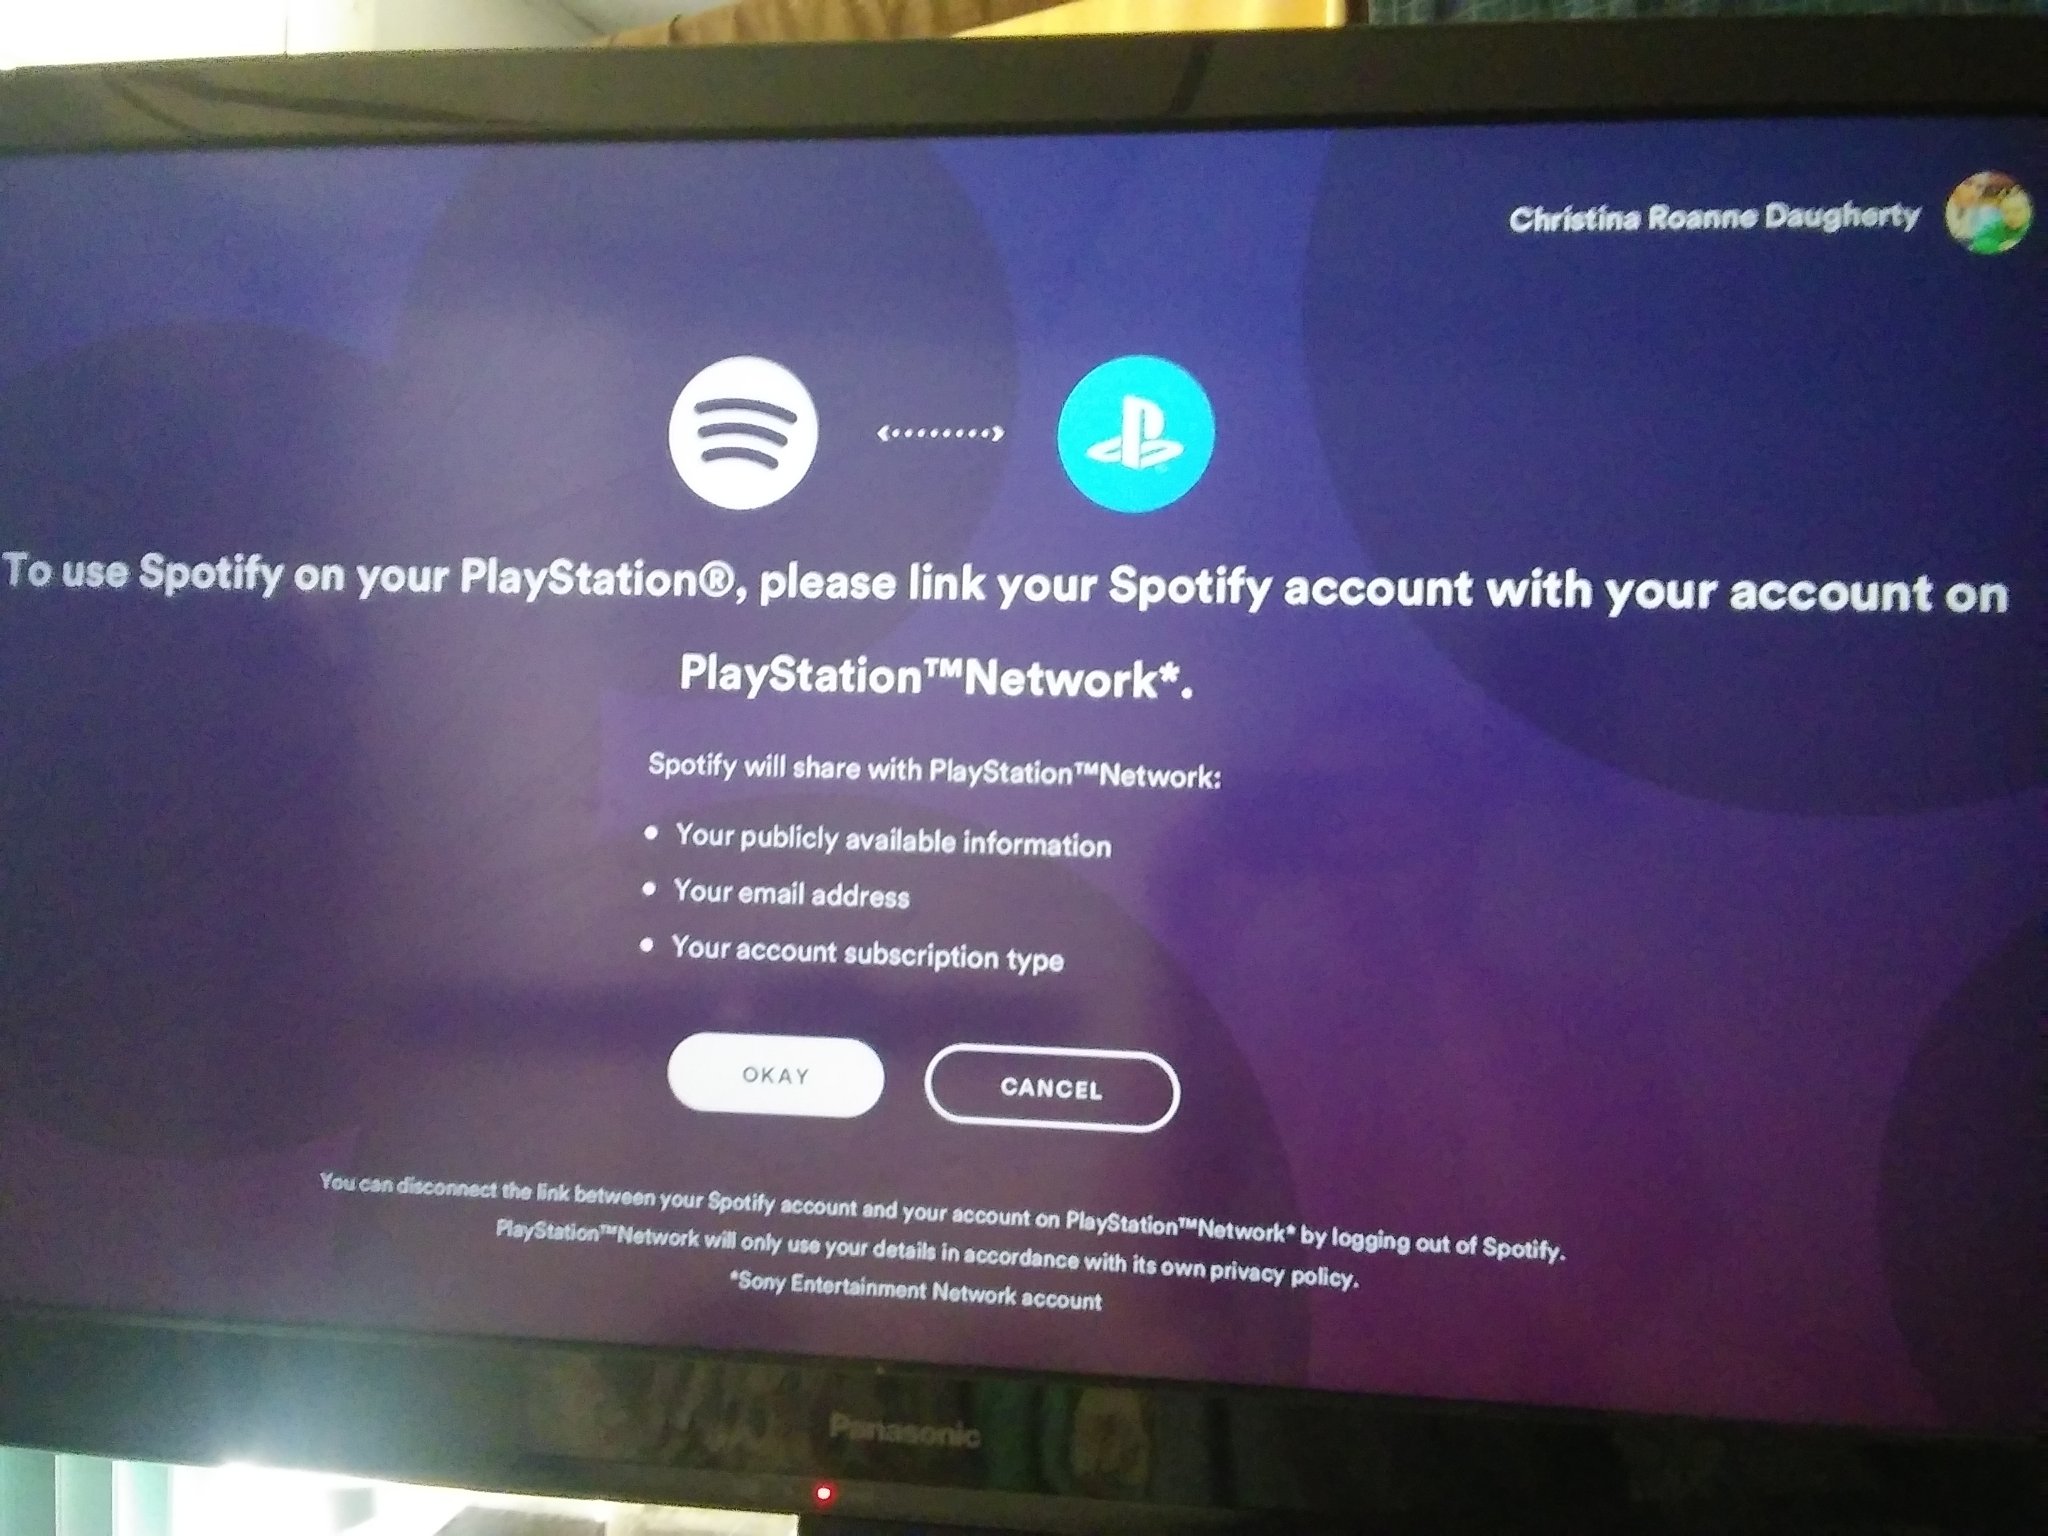 Christina Daugherty on "@AskPlayStation. I'm need soom help my link with PlayStation Music. I linked it to Spotify Account, but then when I get on the Playstation Network it